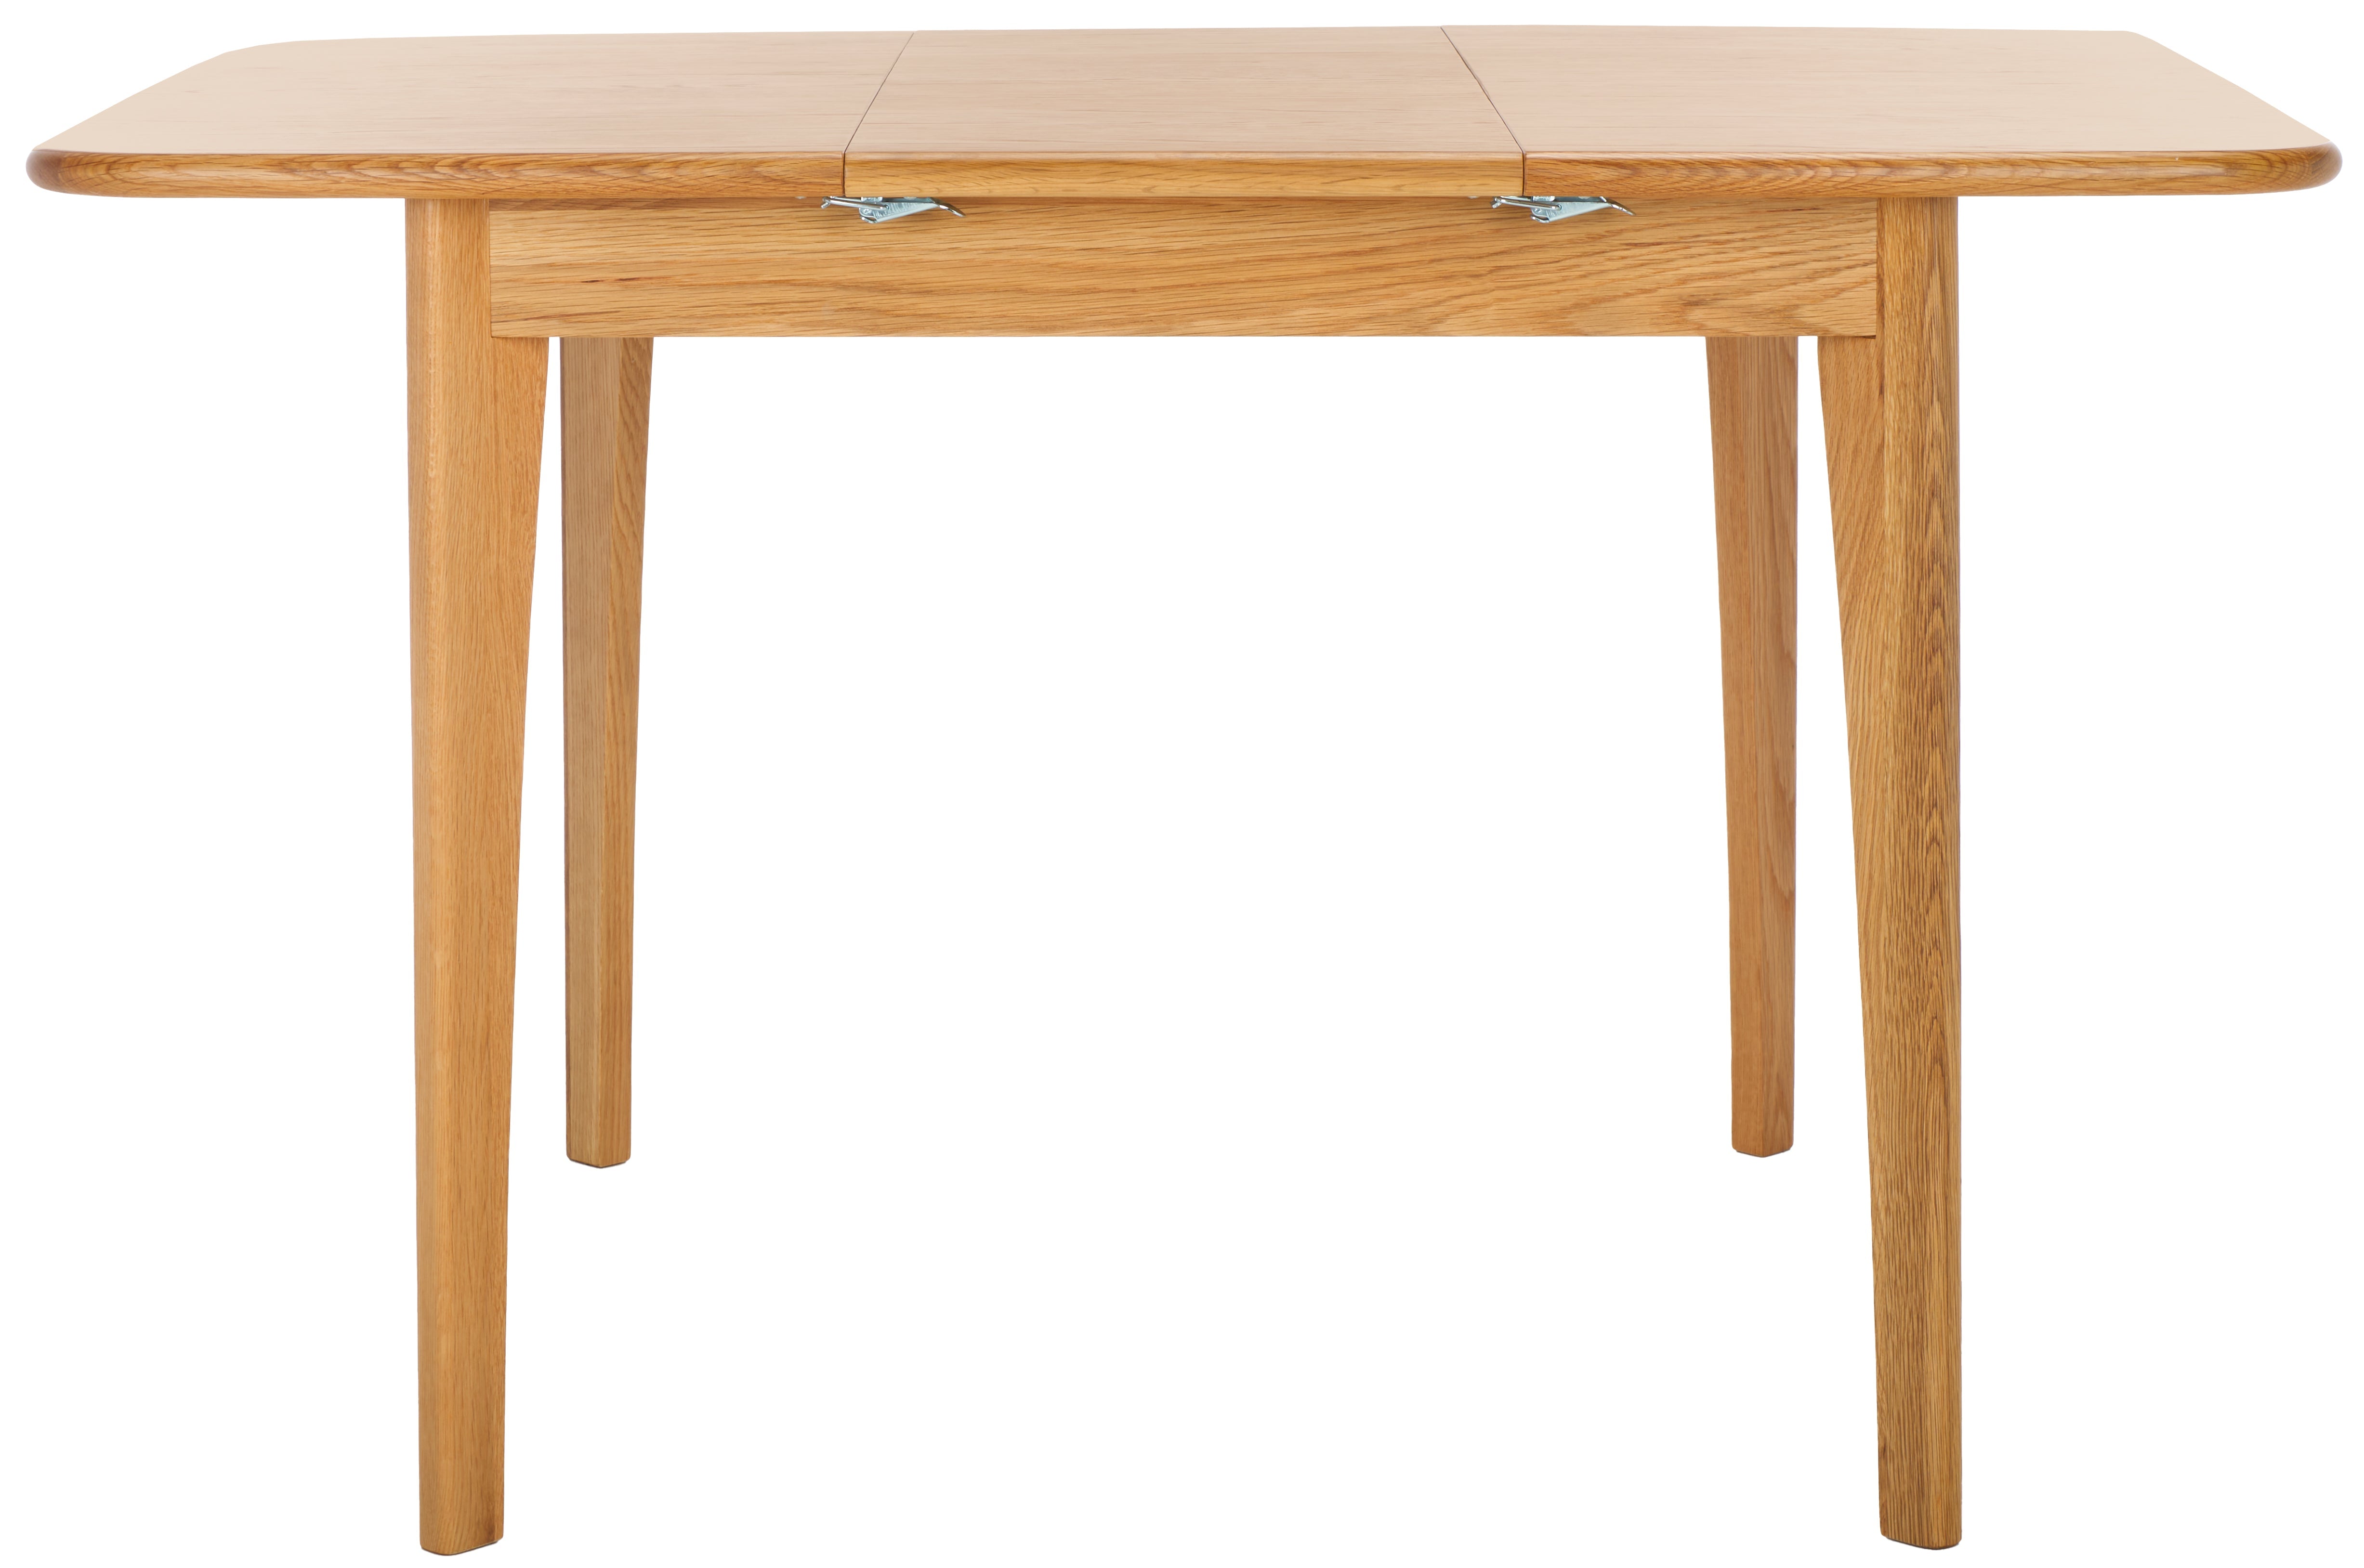 Safavieh Couture Barbossa Extendable Dining Table, SFV4206 - Natural